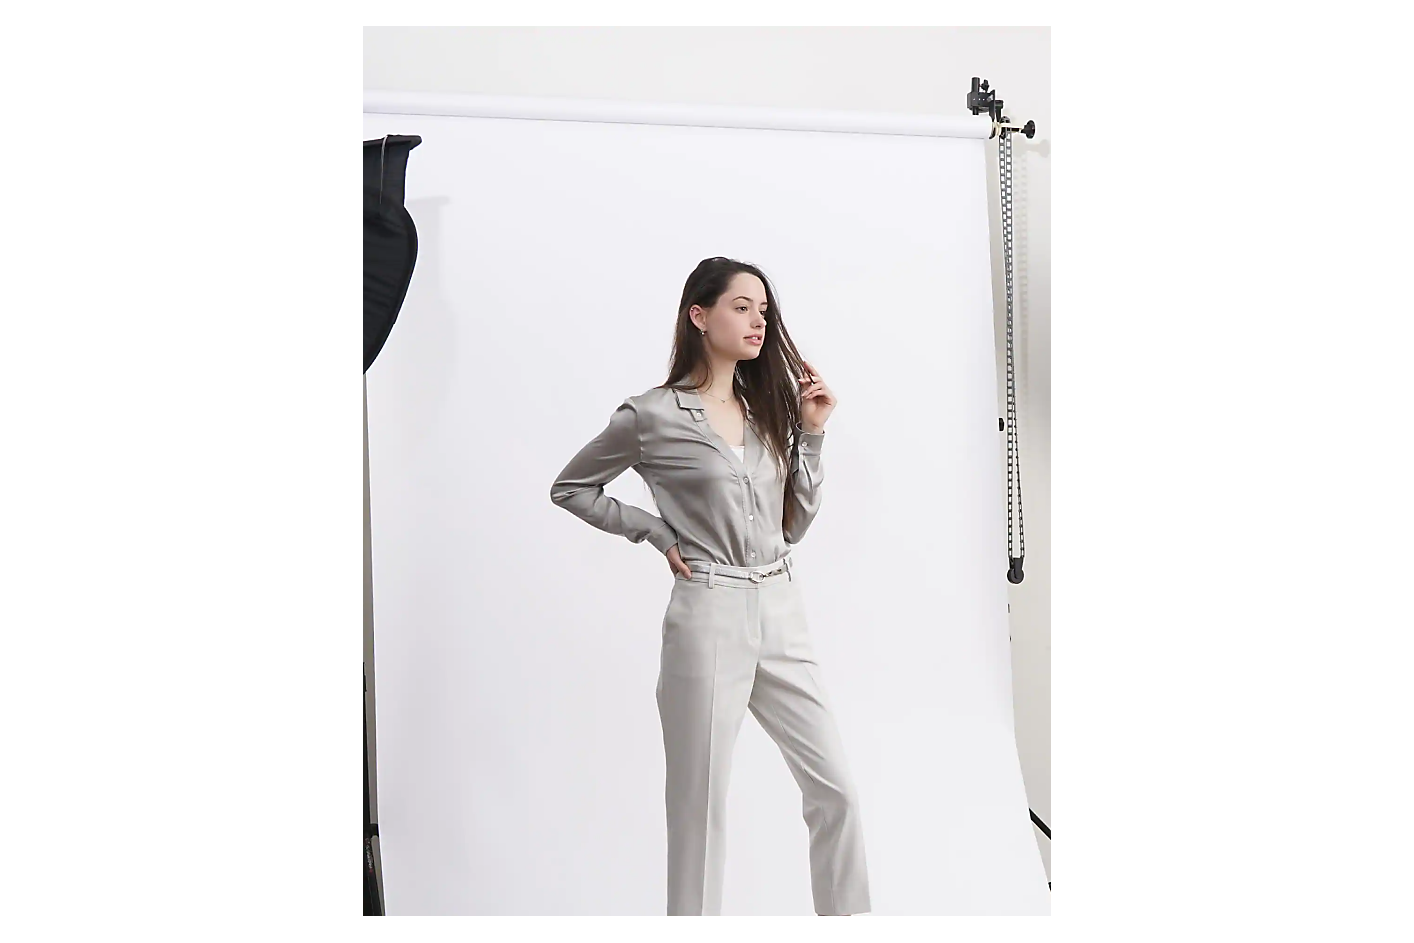 A woman in a light gray outfit poses in front of a white backdrop in a photo studio.